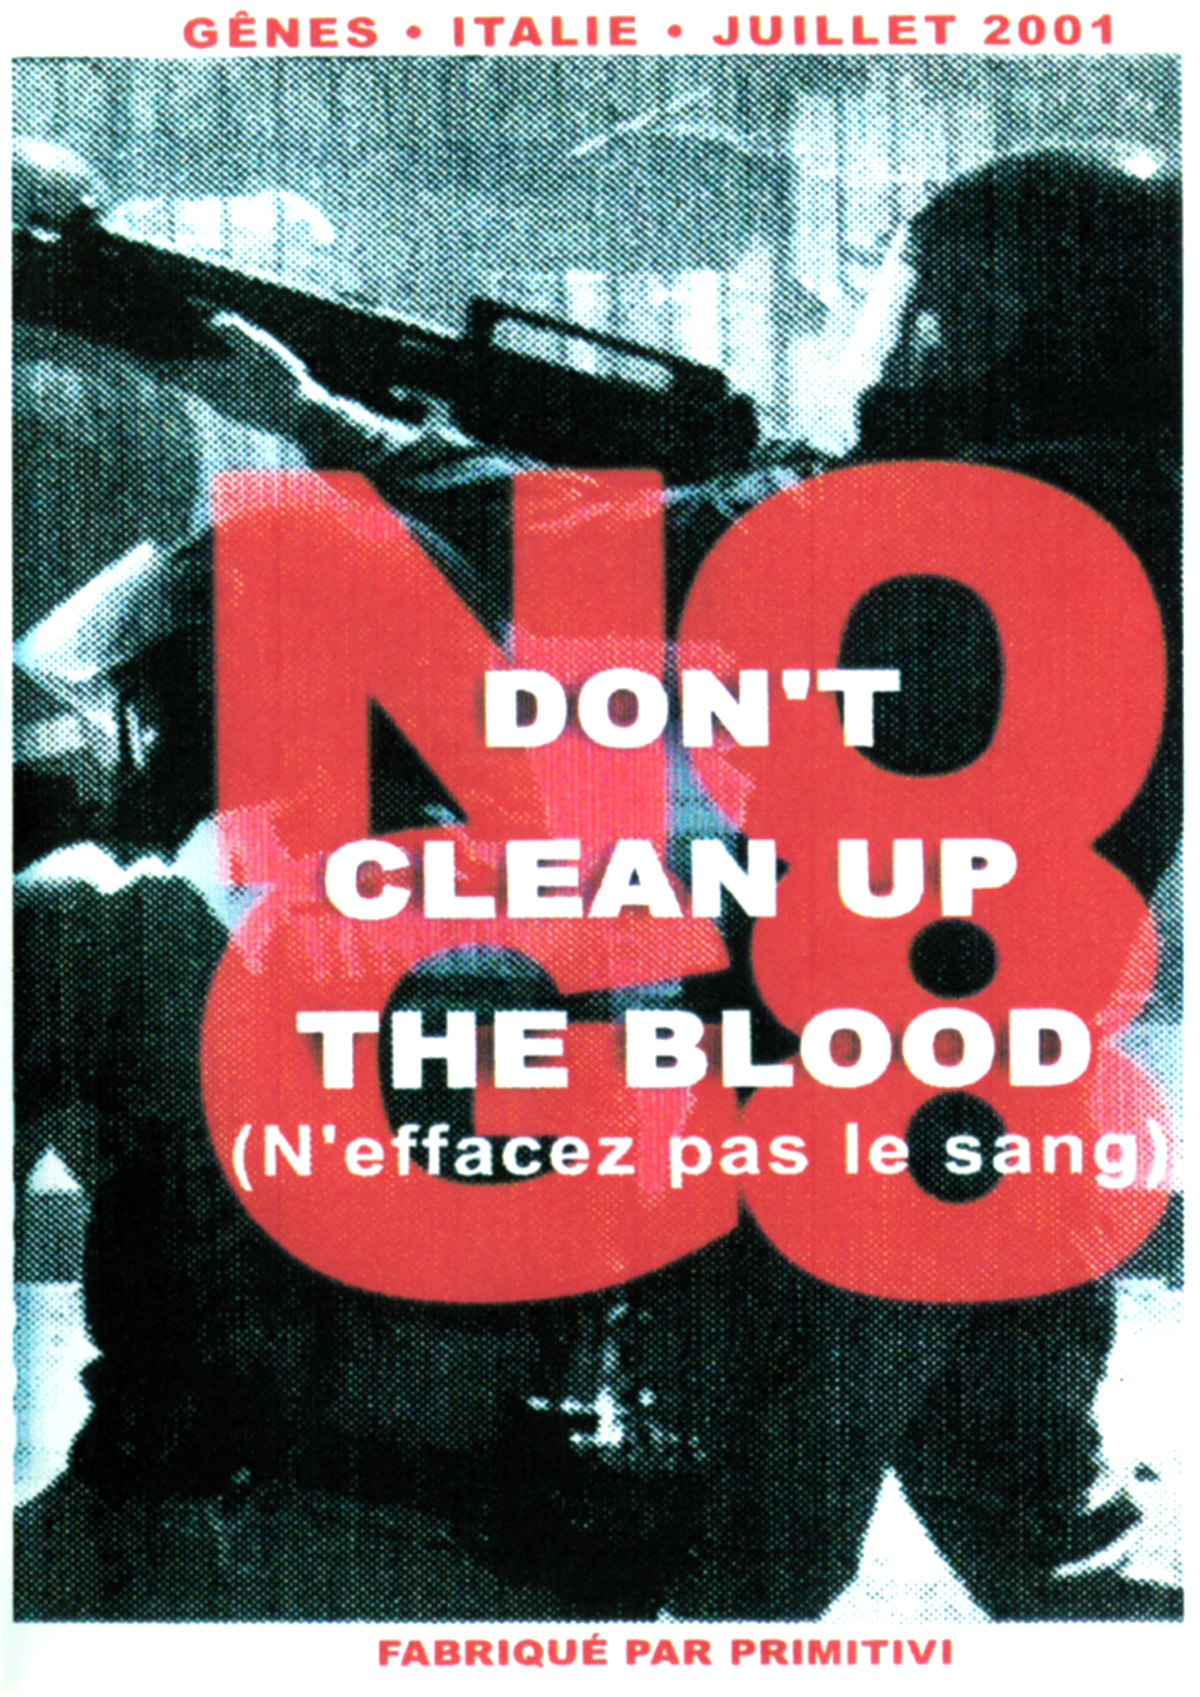 Don't clean up the blood